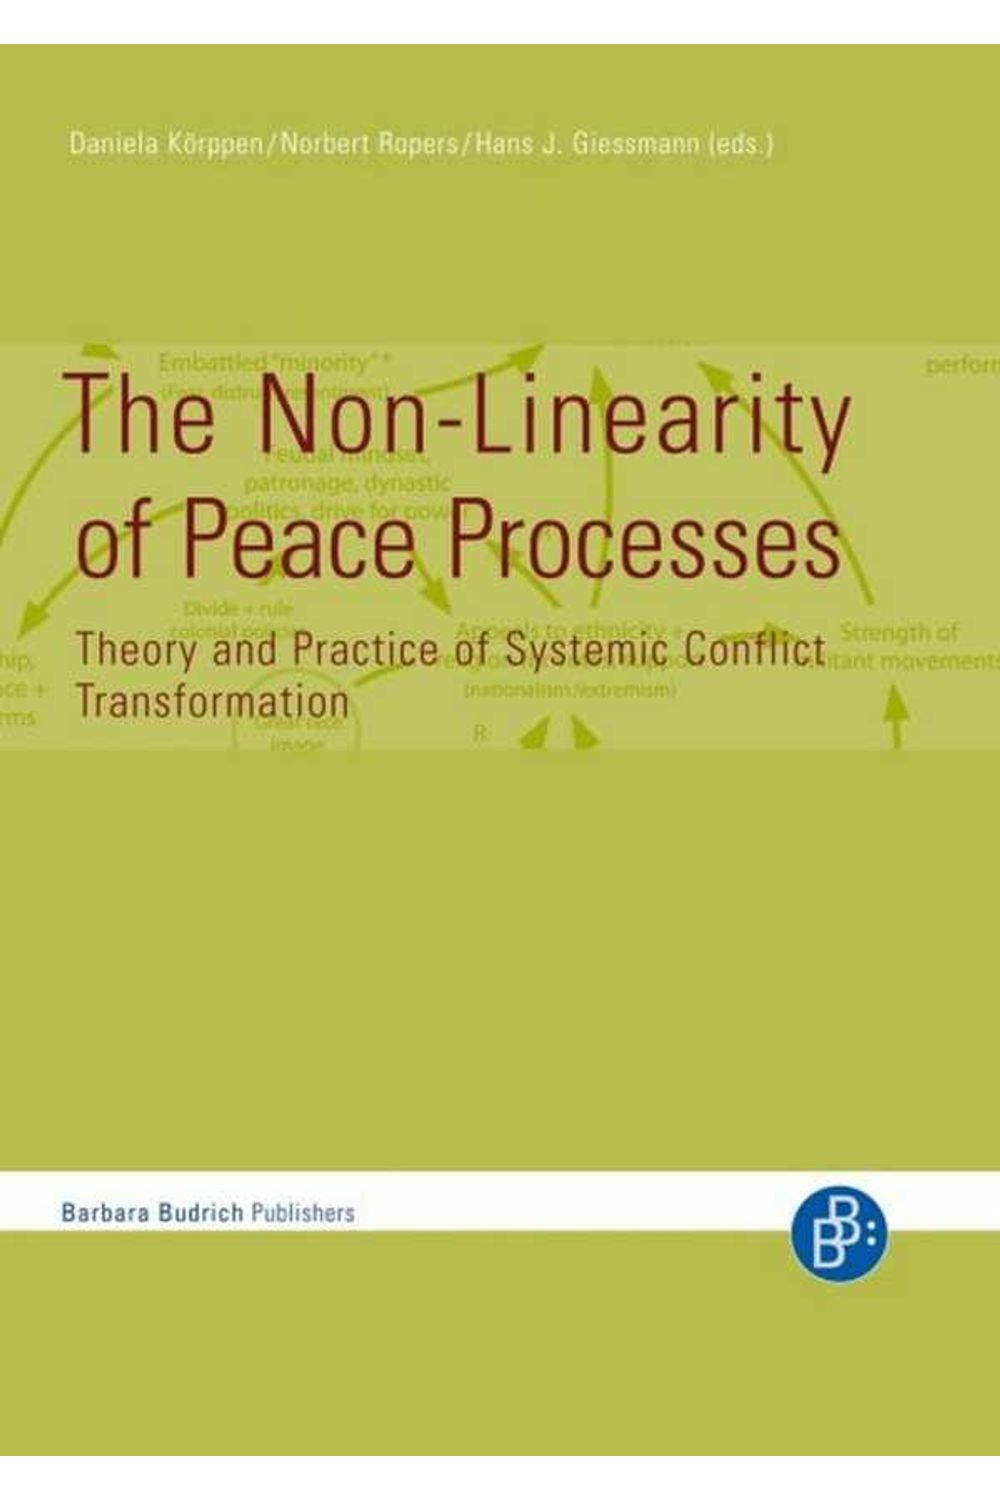 bw-the-nonlinearity-of-peace-processes-verlag-barbara-budrich-9783866496347